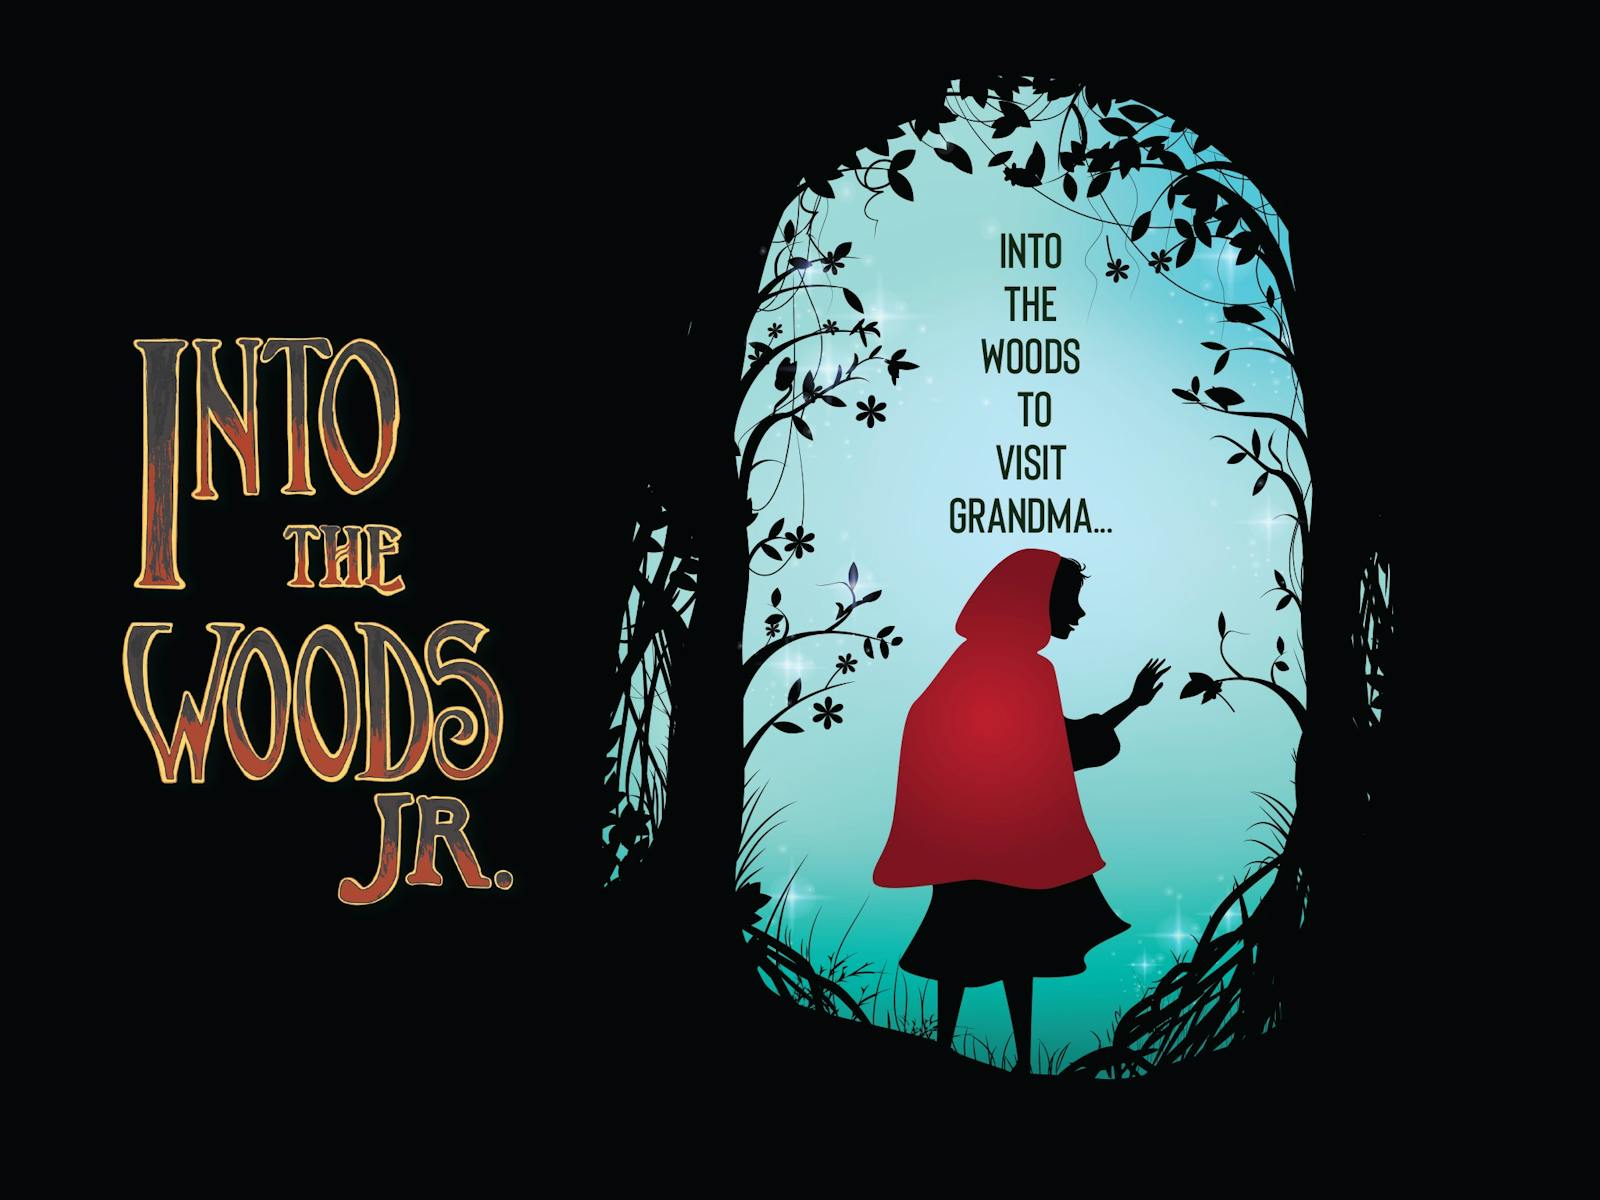 Image for Exitleft presents Into the Woods Jr